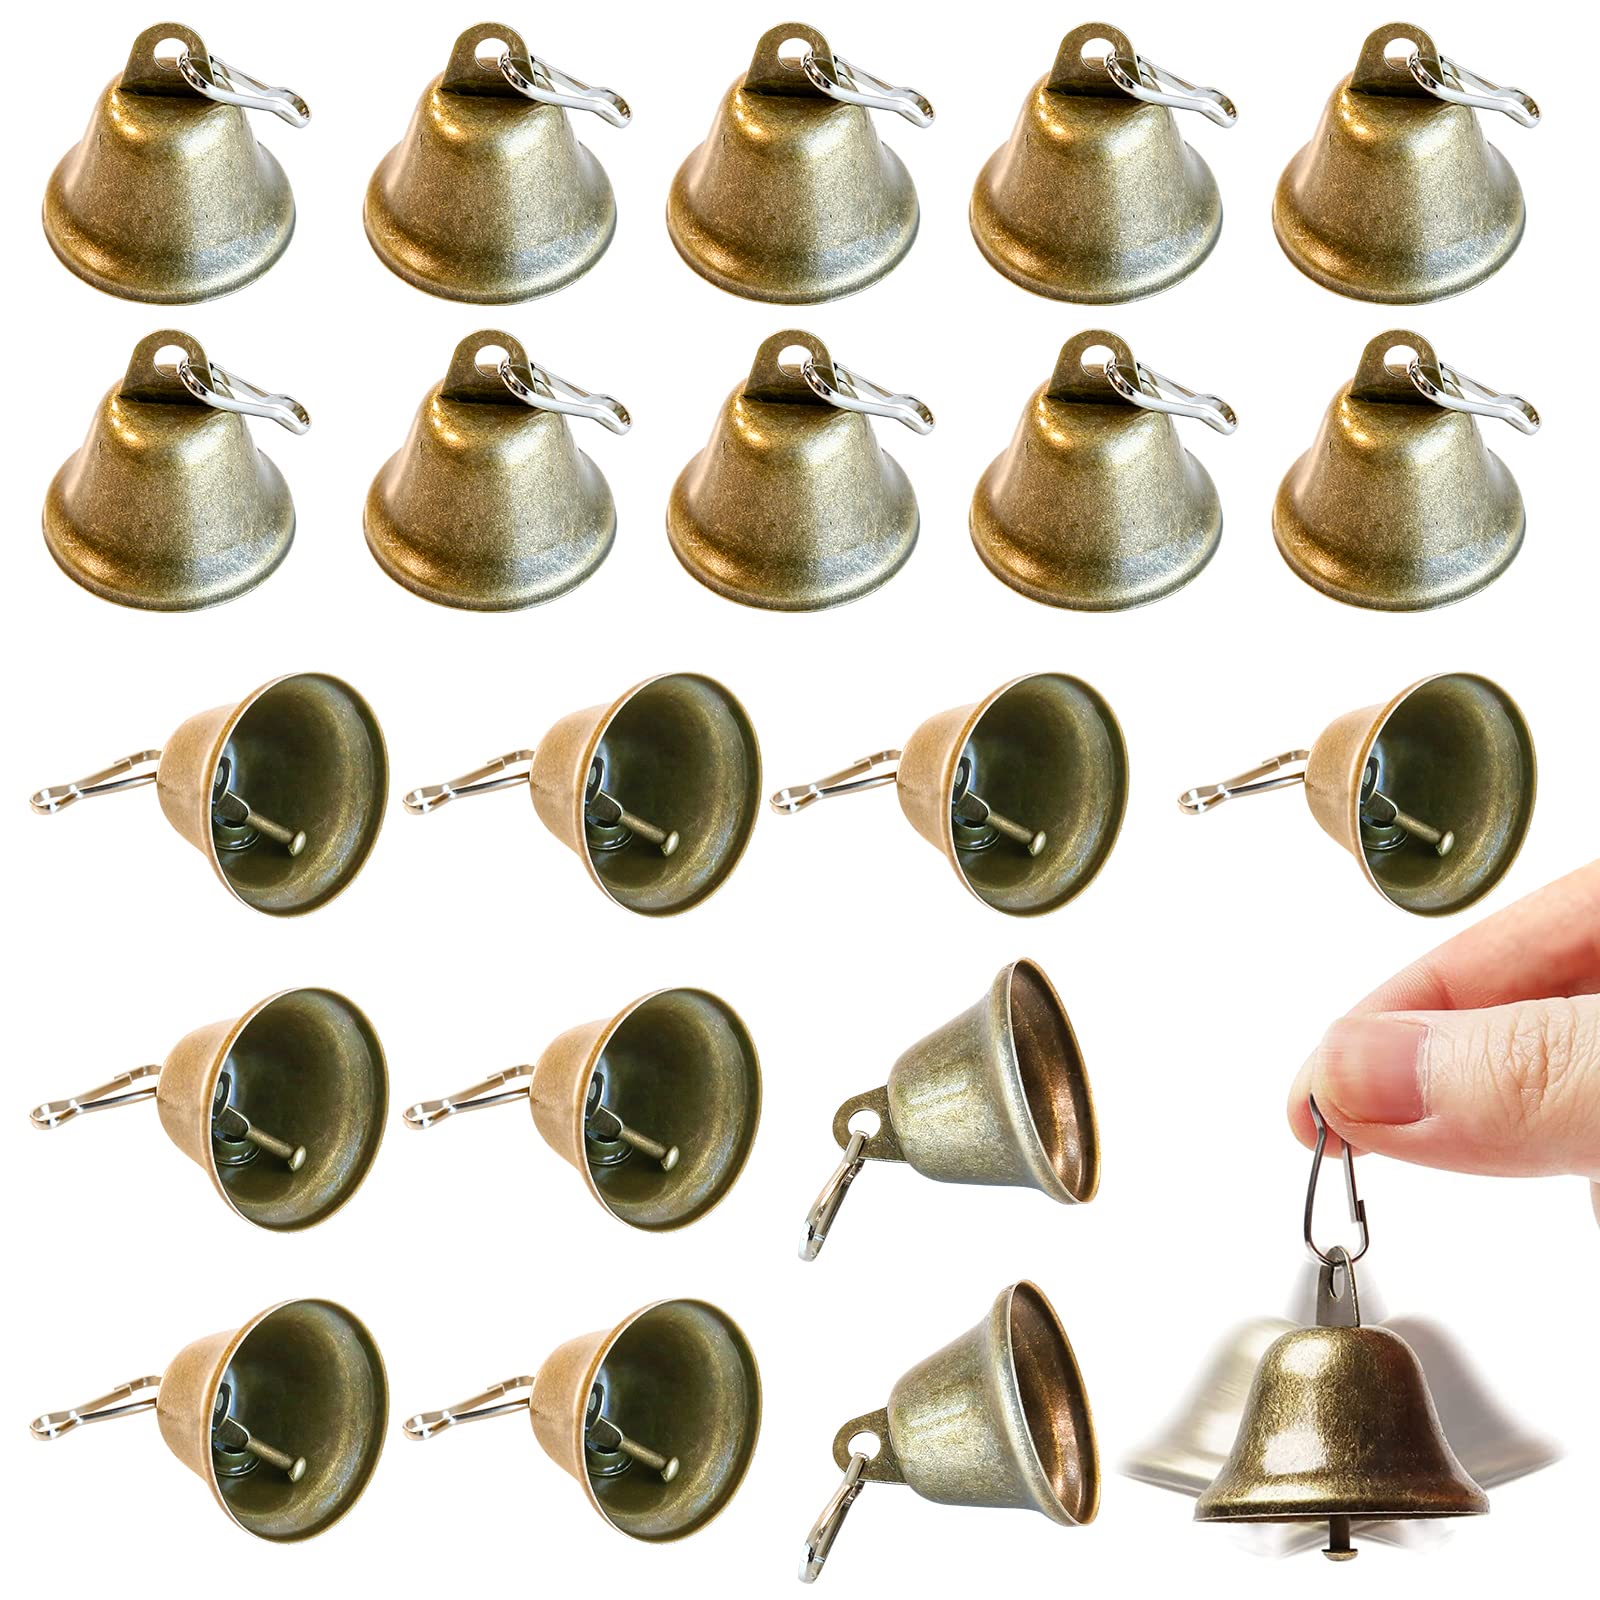 BOAO 40 Pieces 1.5 inch Bronze Jingle Bells Vintage Jingle Bells Craft Bells  Christmas Bells for Dog Potty Training, Making Wind